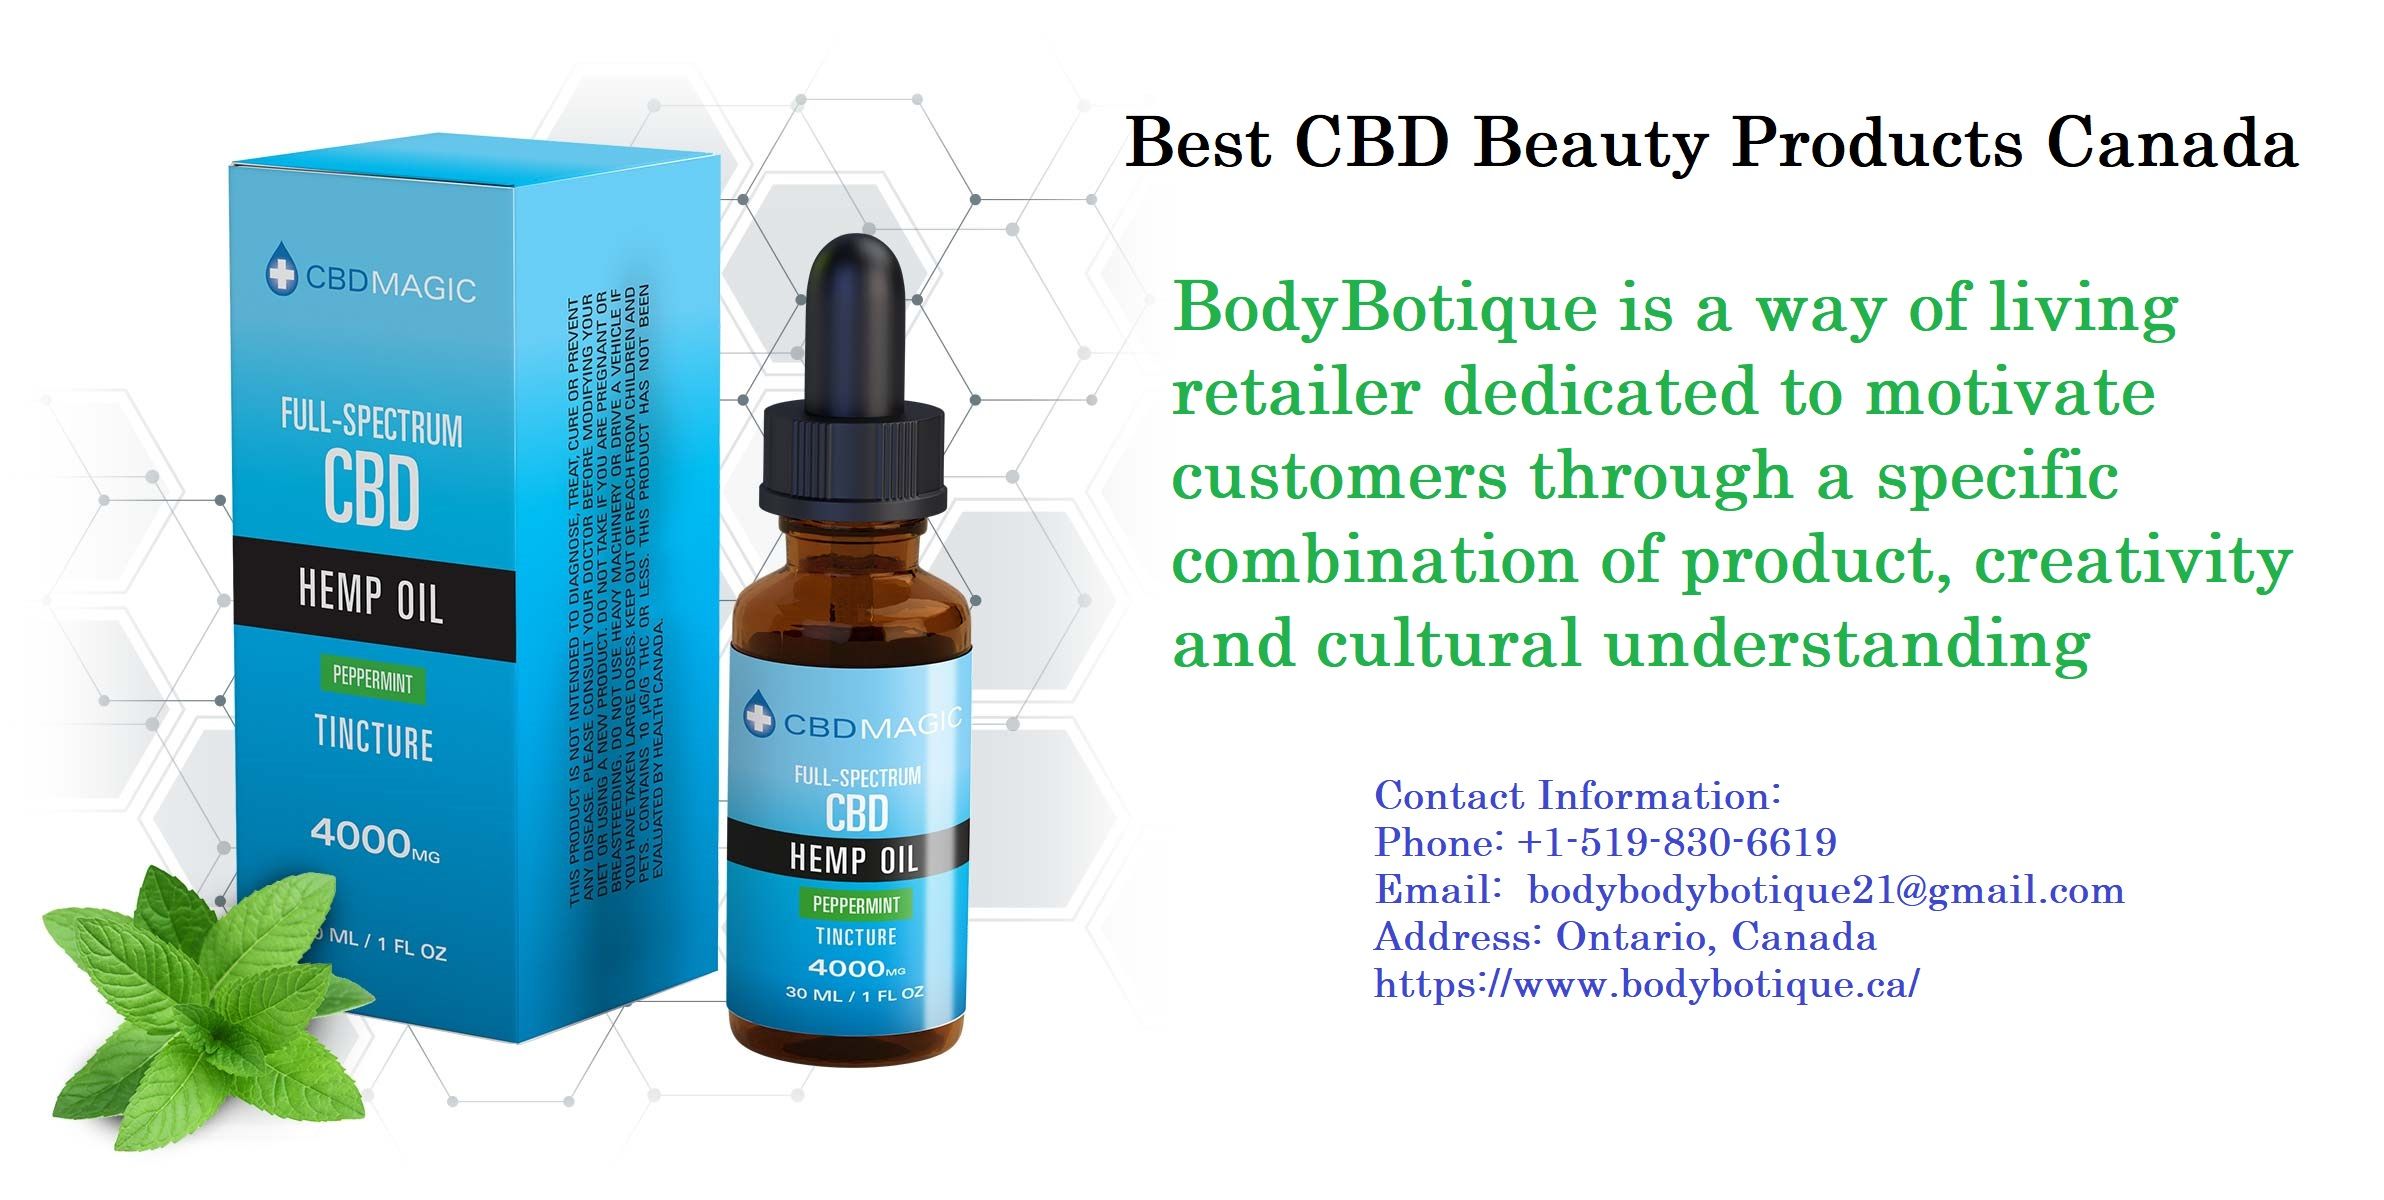 Best CBD Beauty Products Canada | BodyBotique